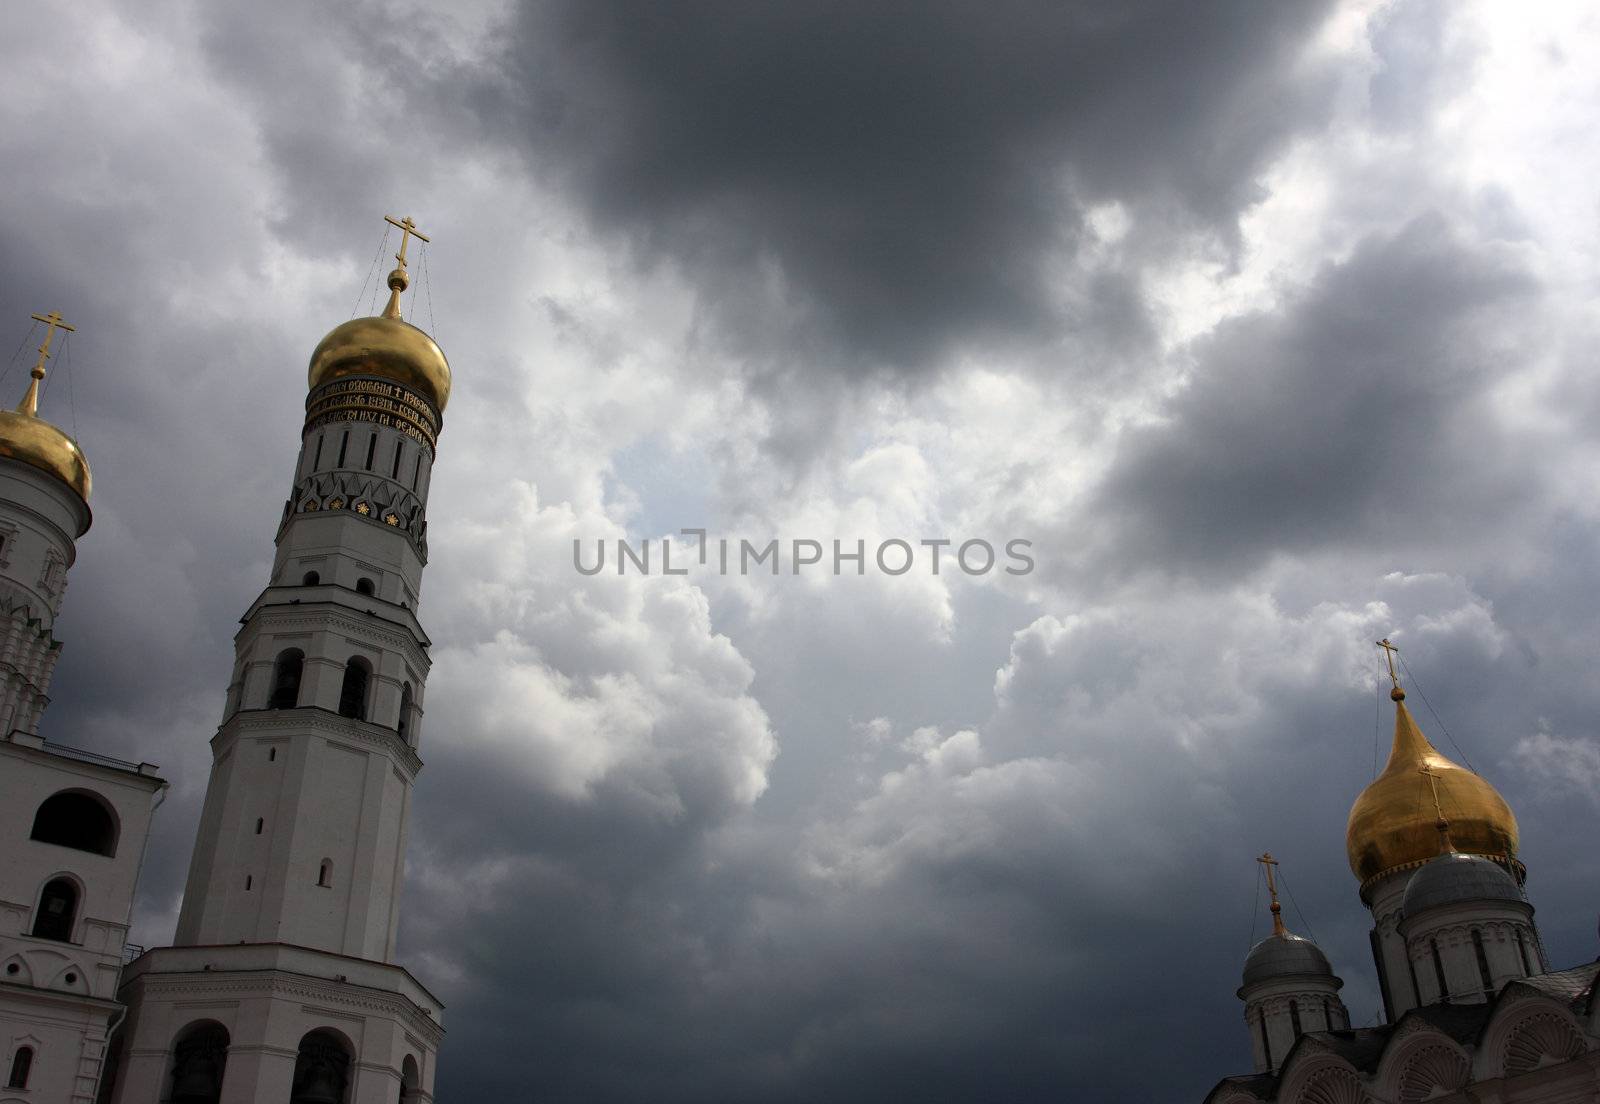  traditional, ivan, terrible, bell, tower, belfry, touris, square, the, kremlin, moscow, city, people, sky, dense, heavy, thick, clouds, cupola, dome, christianity, cross, russia, architecture, building, religion